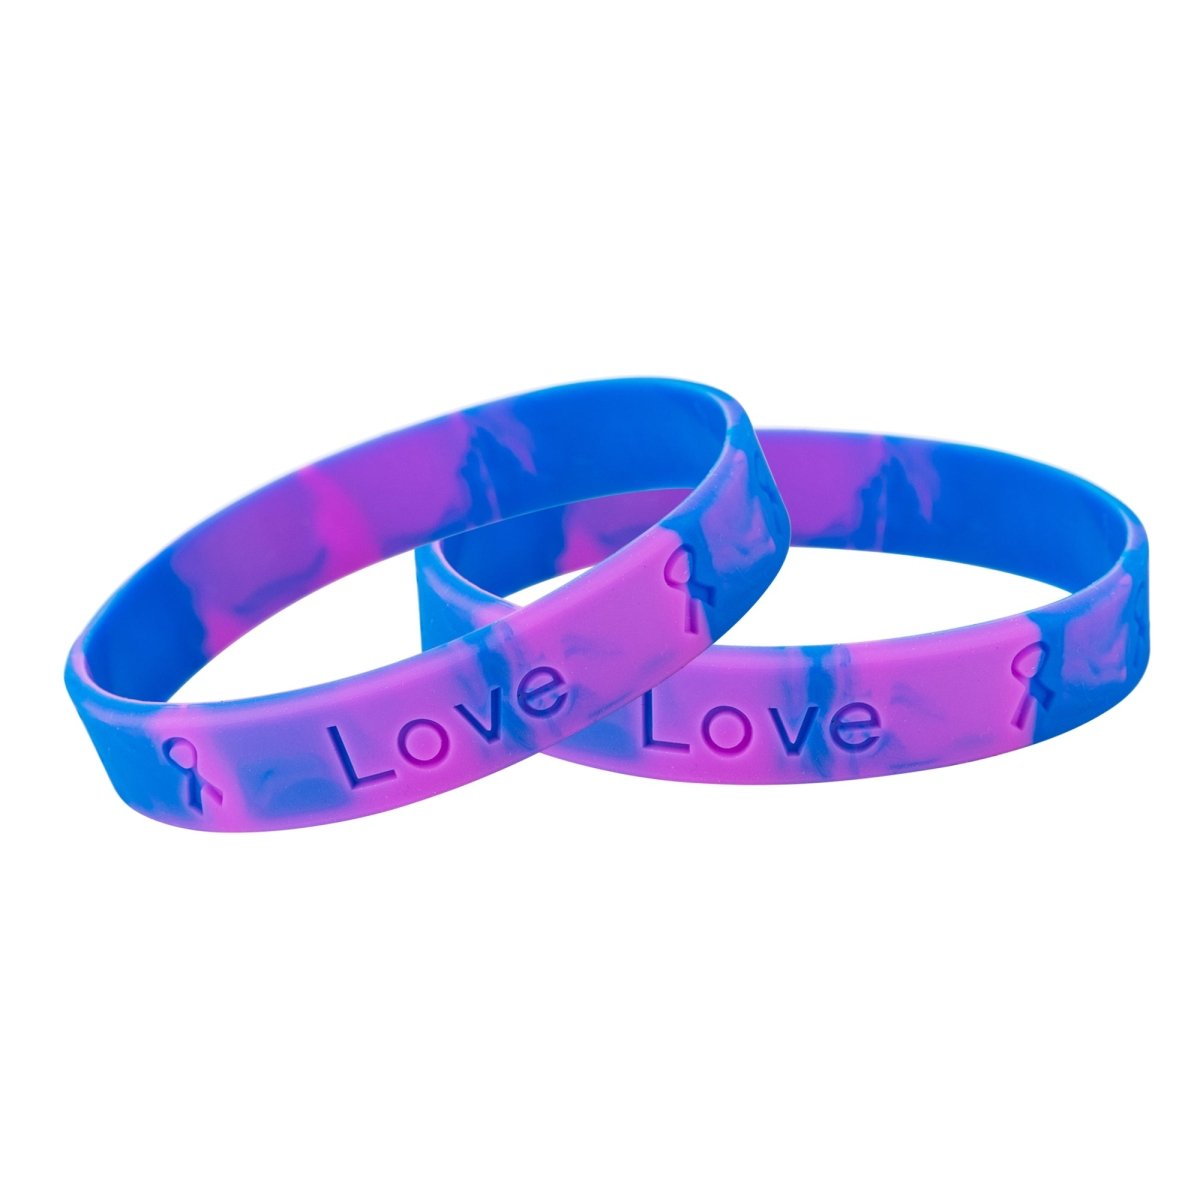 Adult Pediatric Stroke Awareness Silicone Bracelet Wristbands - Fundraising For A Cause